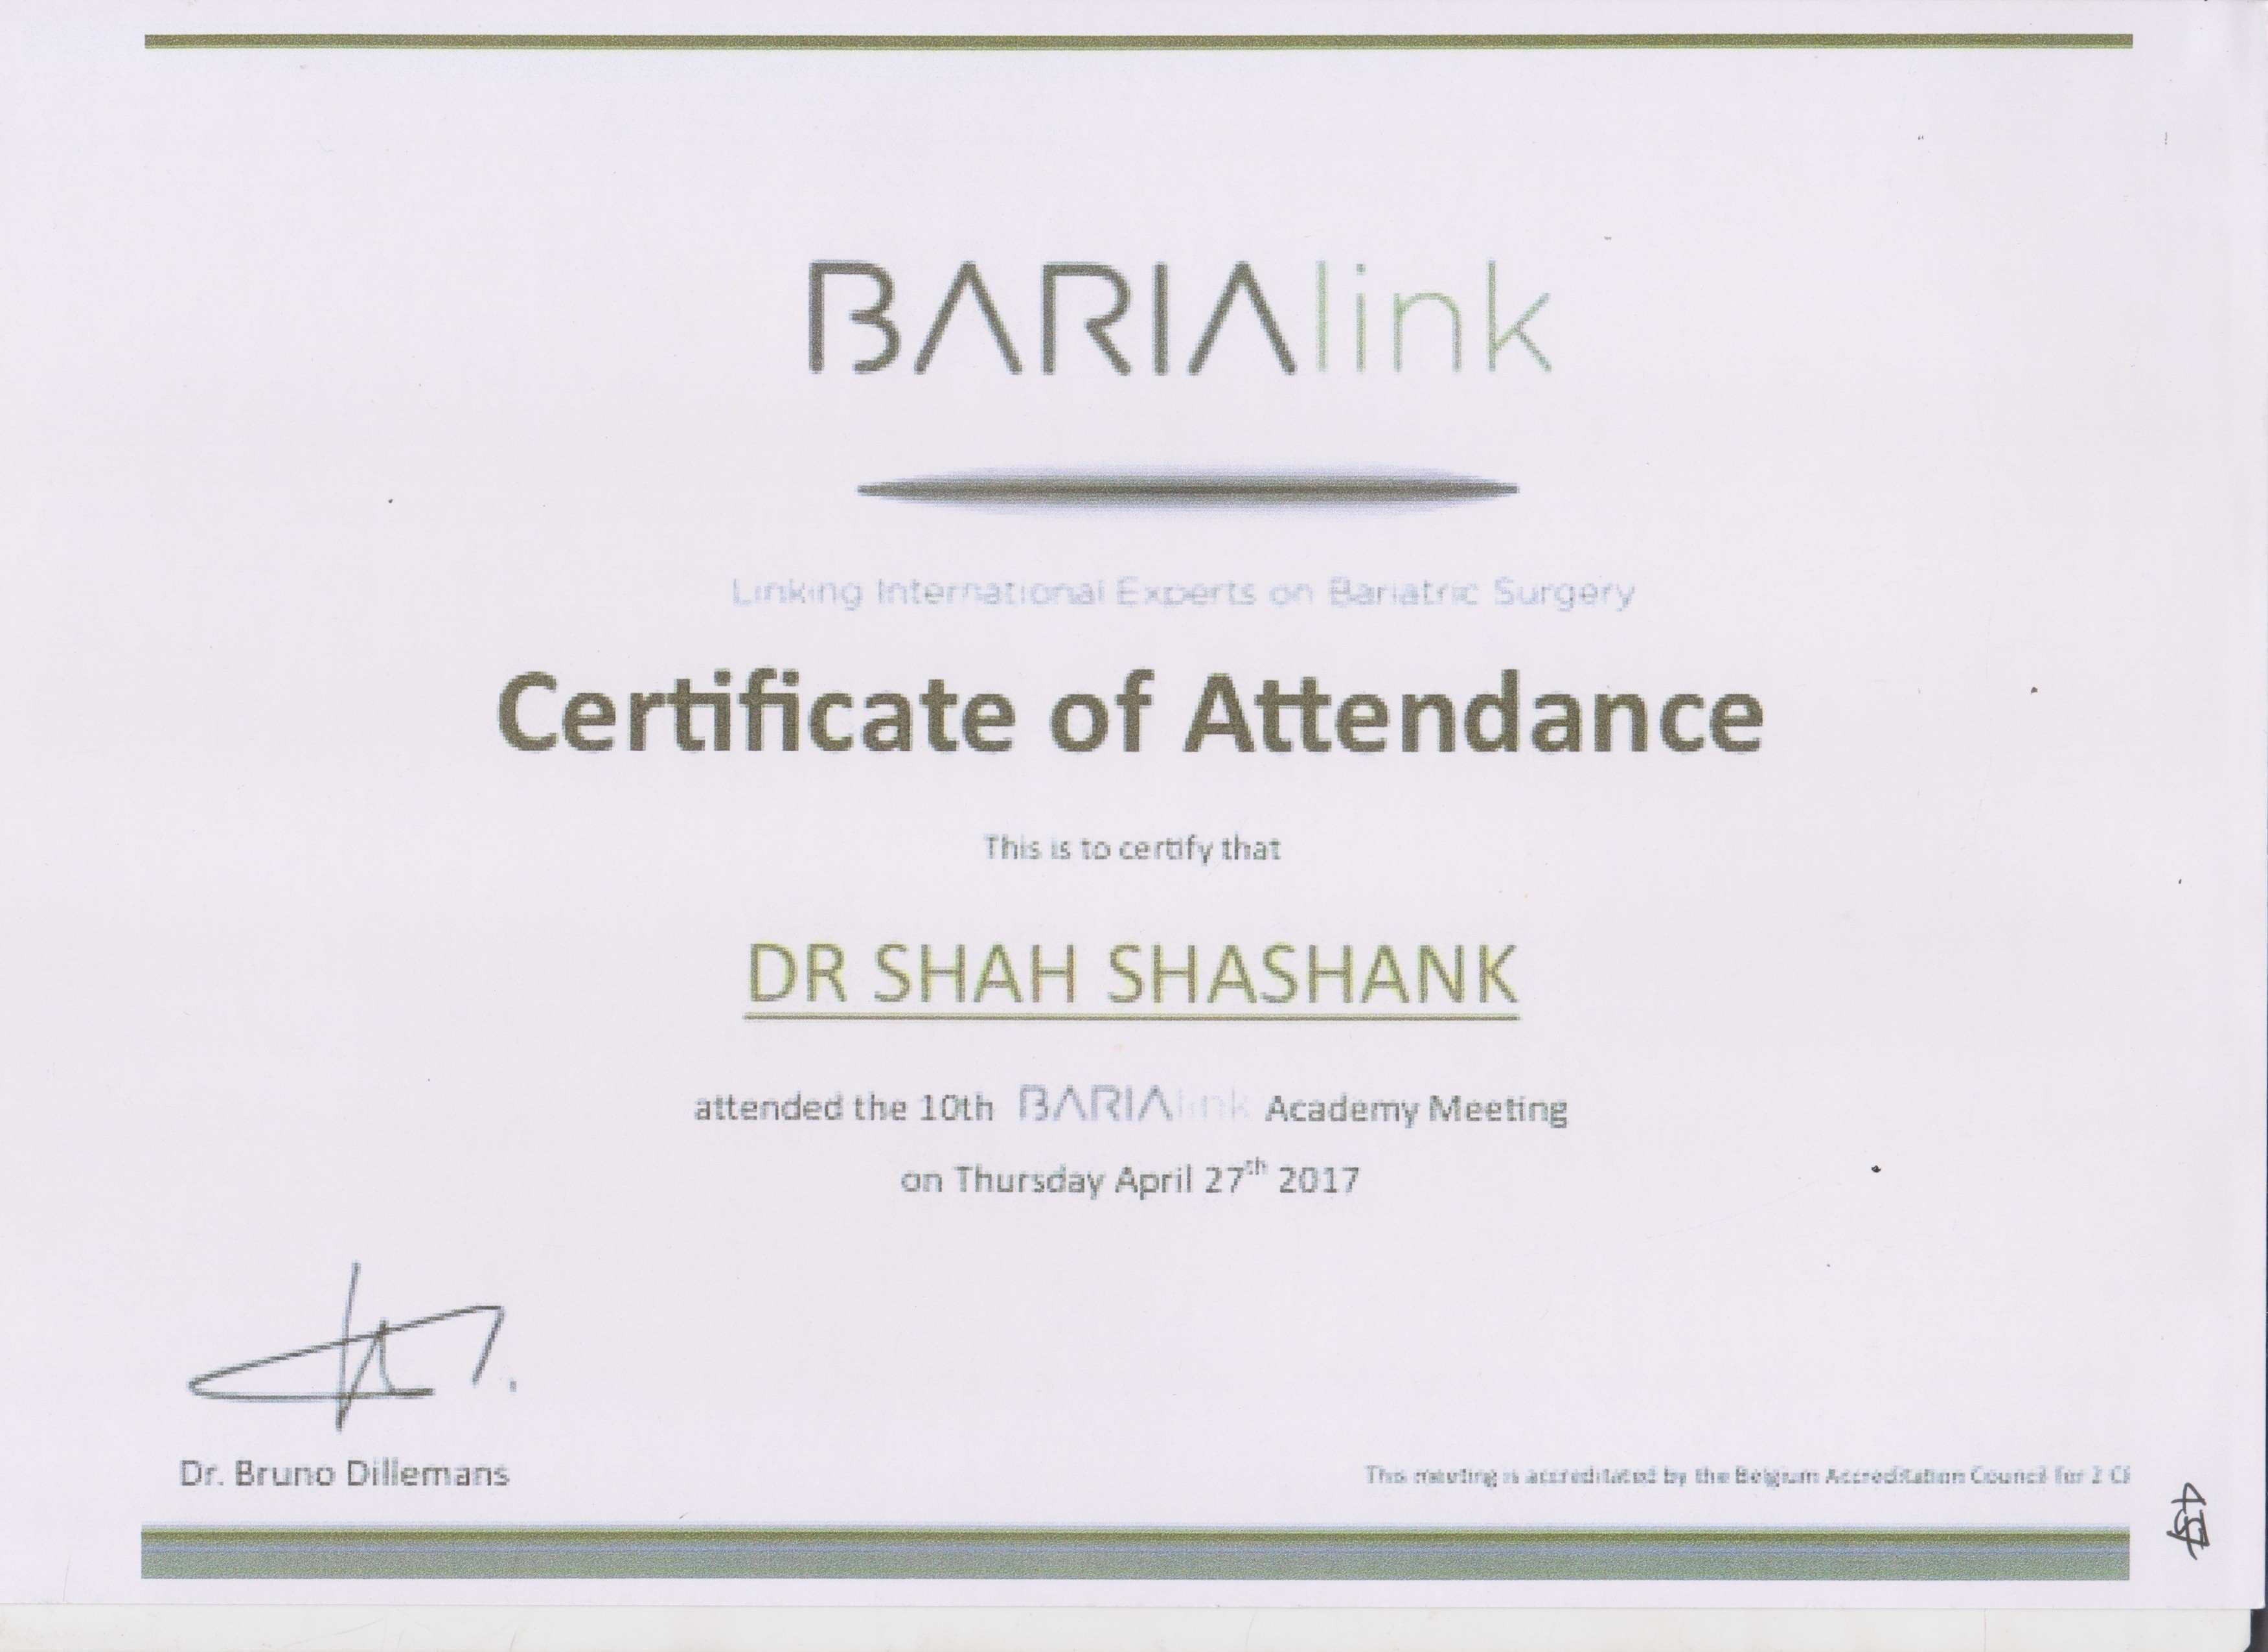 Dr Shashank Shah’s Certificate of Attendance of the 10th Barialink Academy Meeting in 2017. 